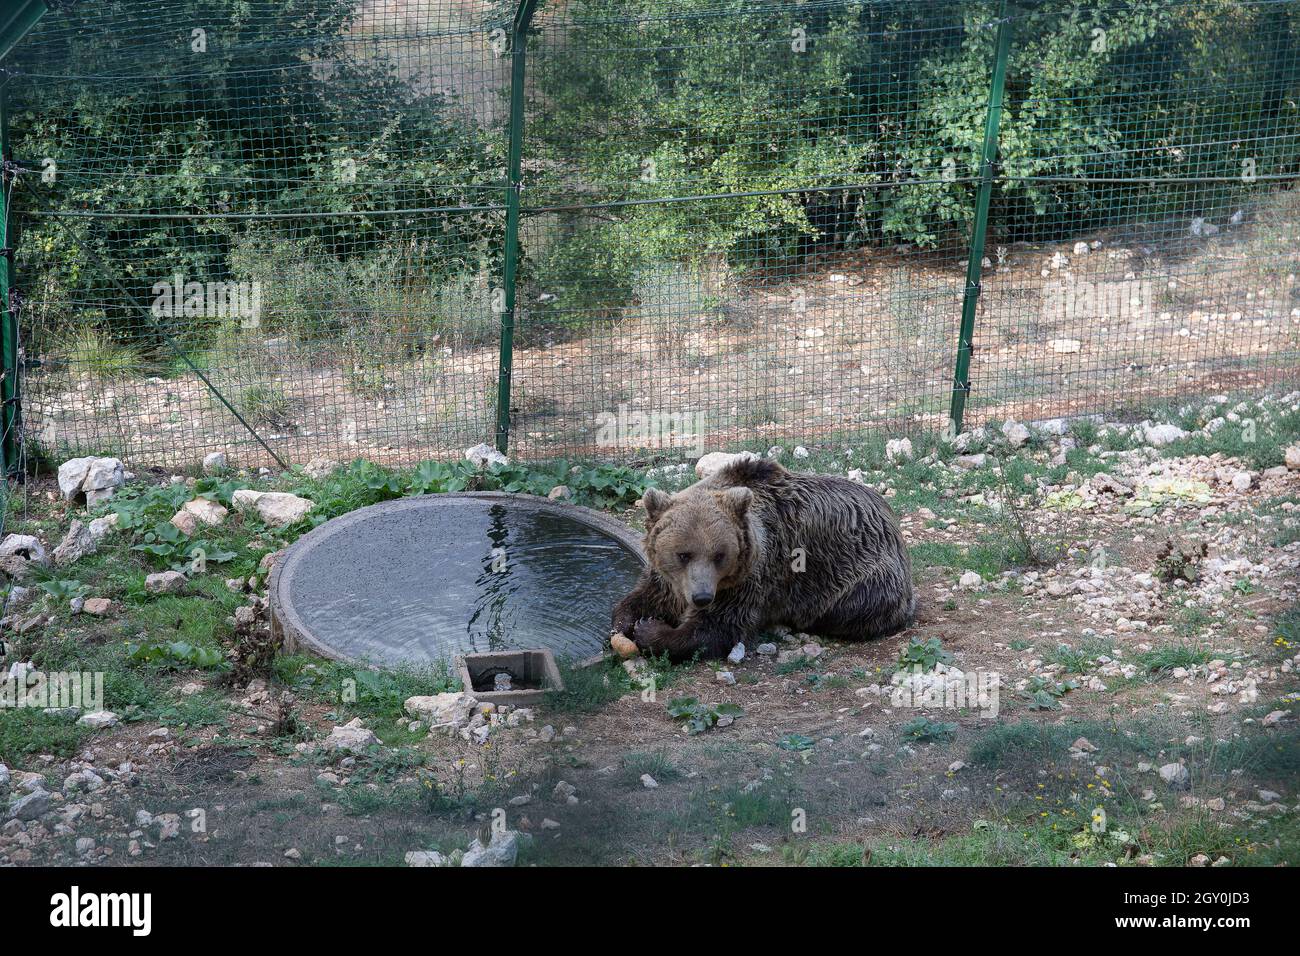 European brown bear in captivity in the enclosed wildlife area, eating bread. Stock Photo